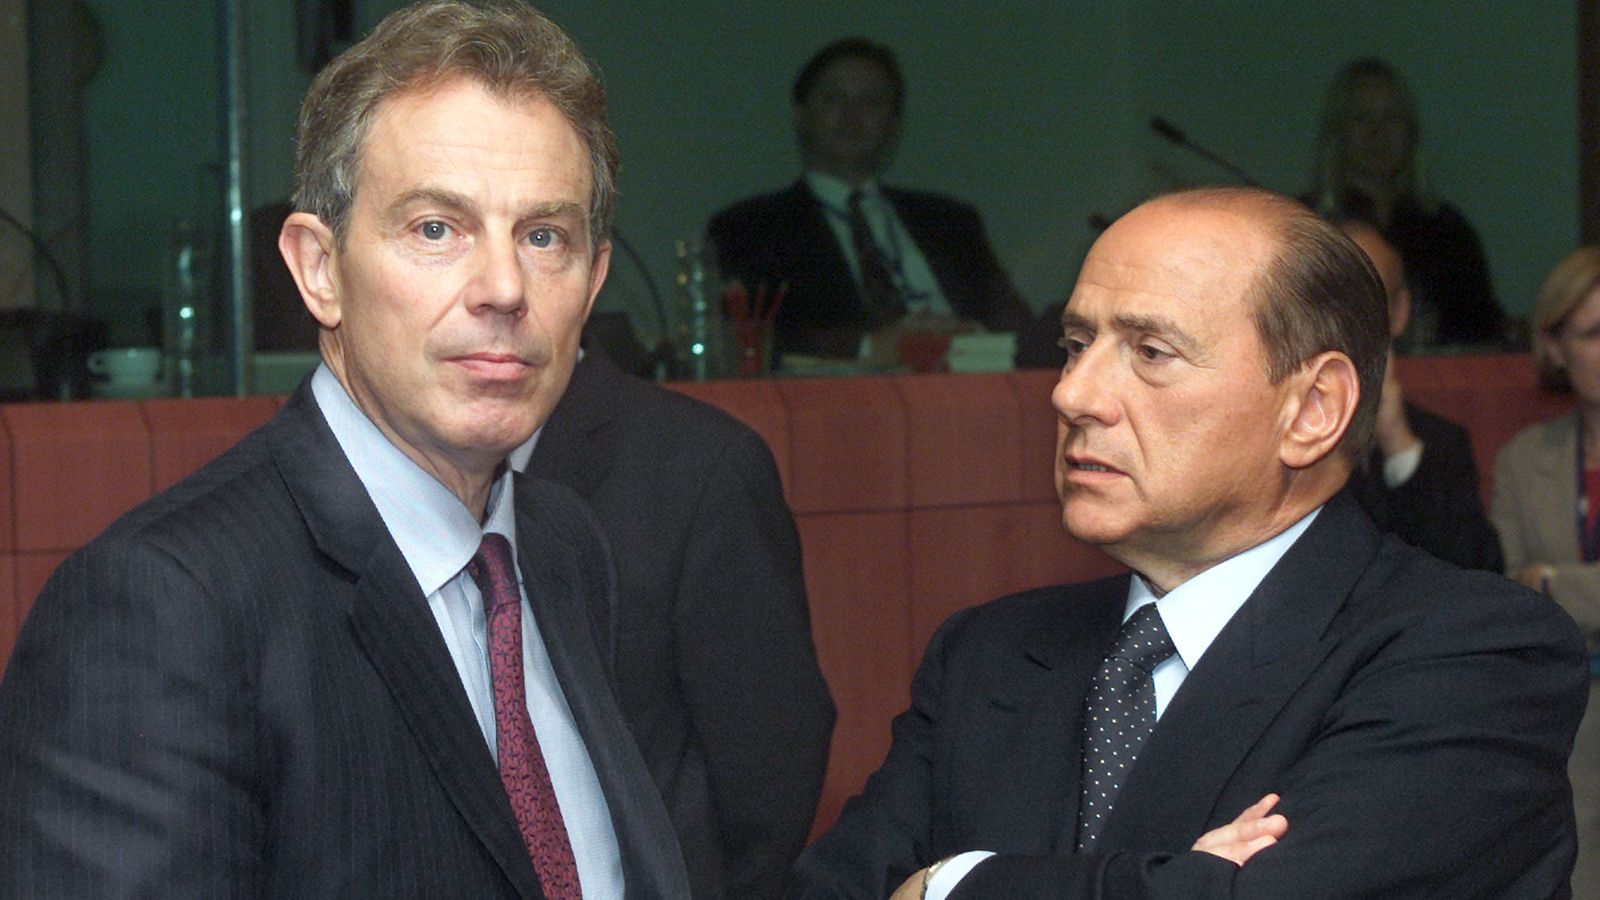 Tony Blair desperate to avoid reports of 'snuggling up' to Silvio Berlusconi, files show